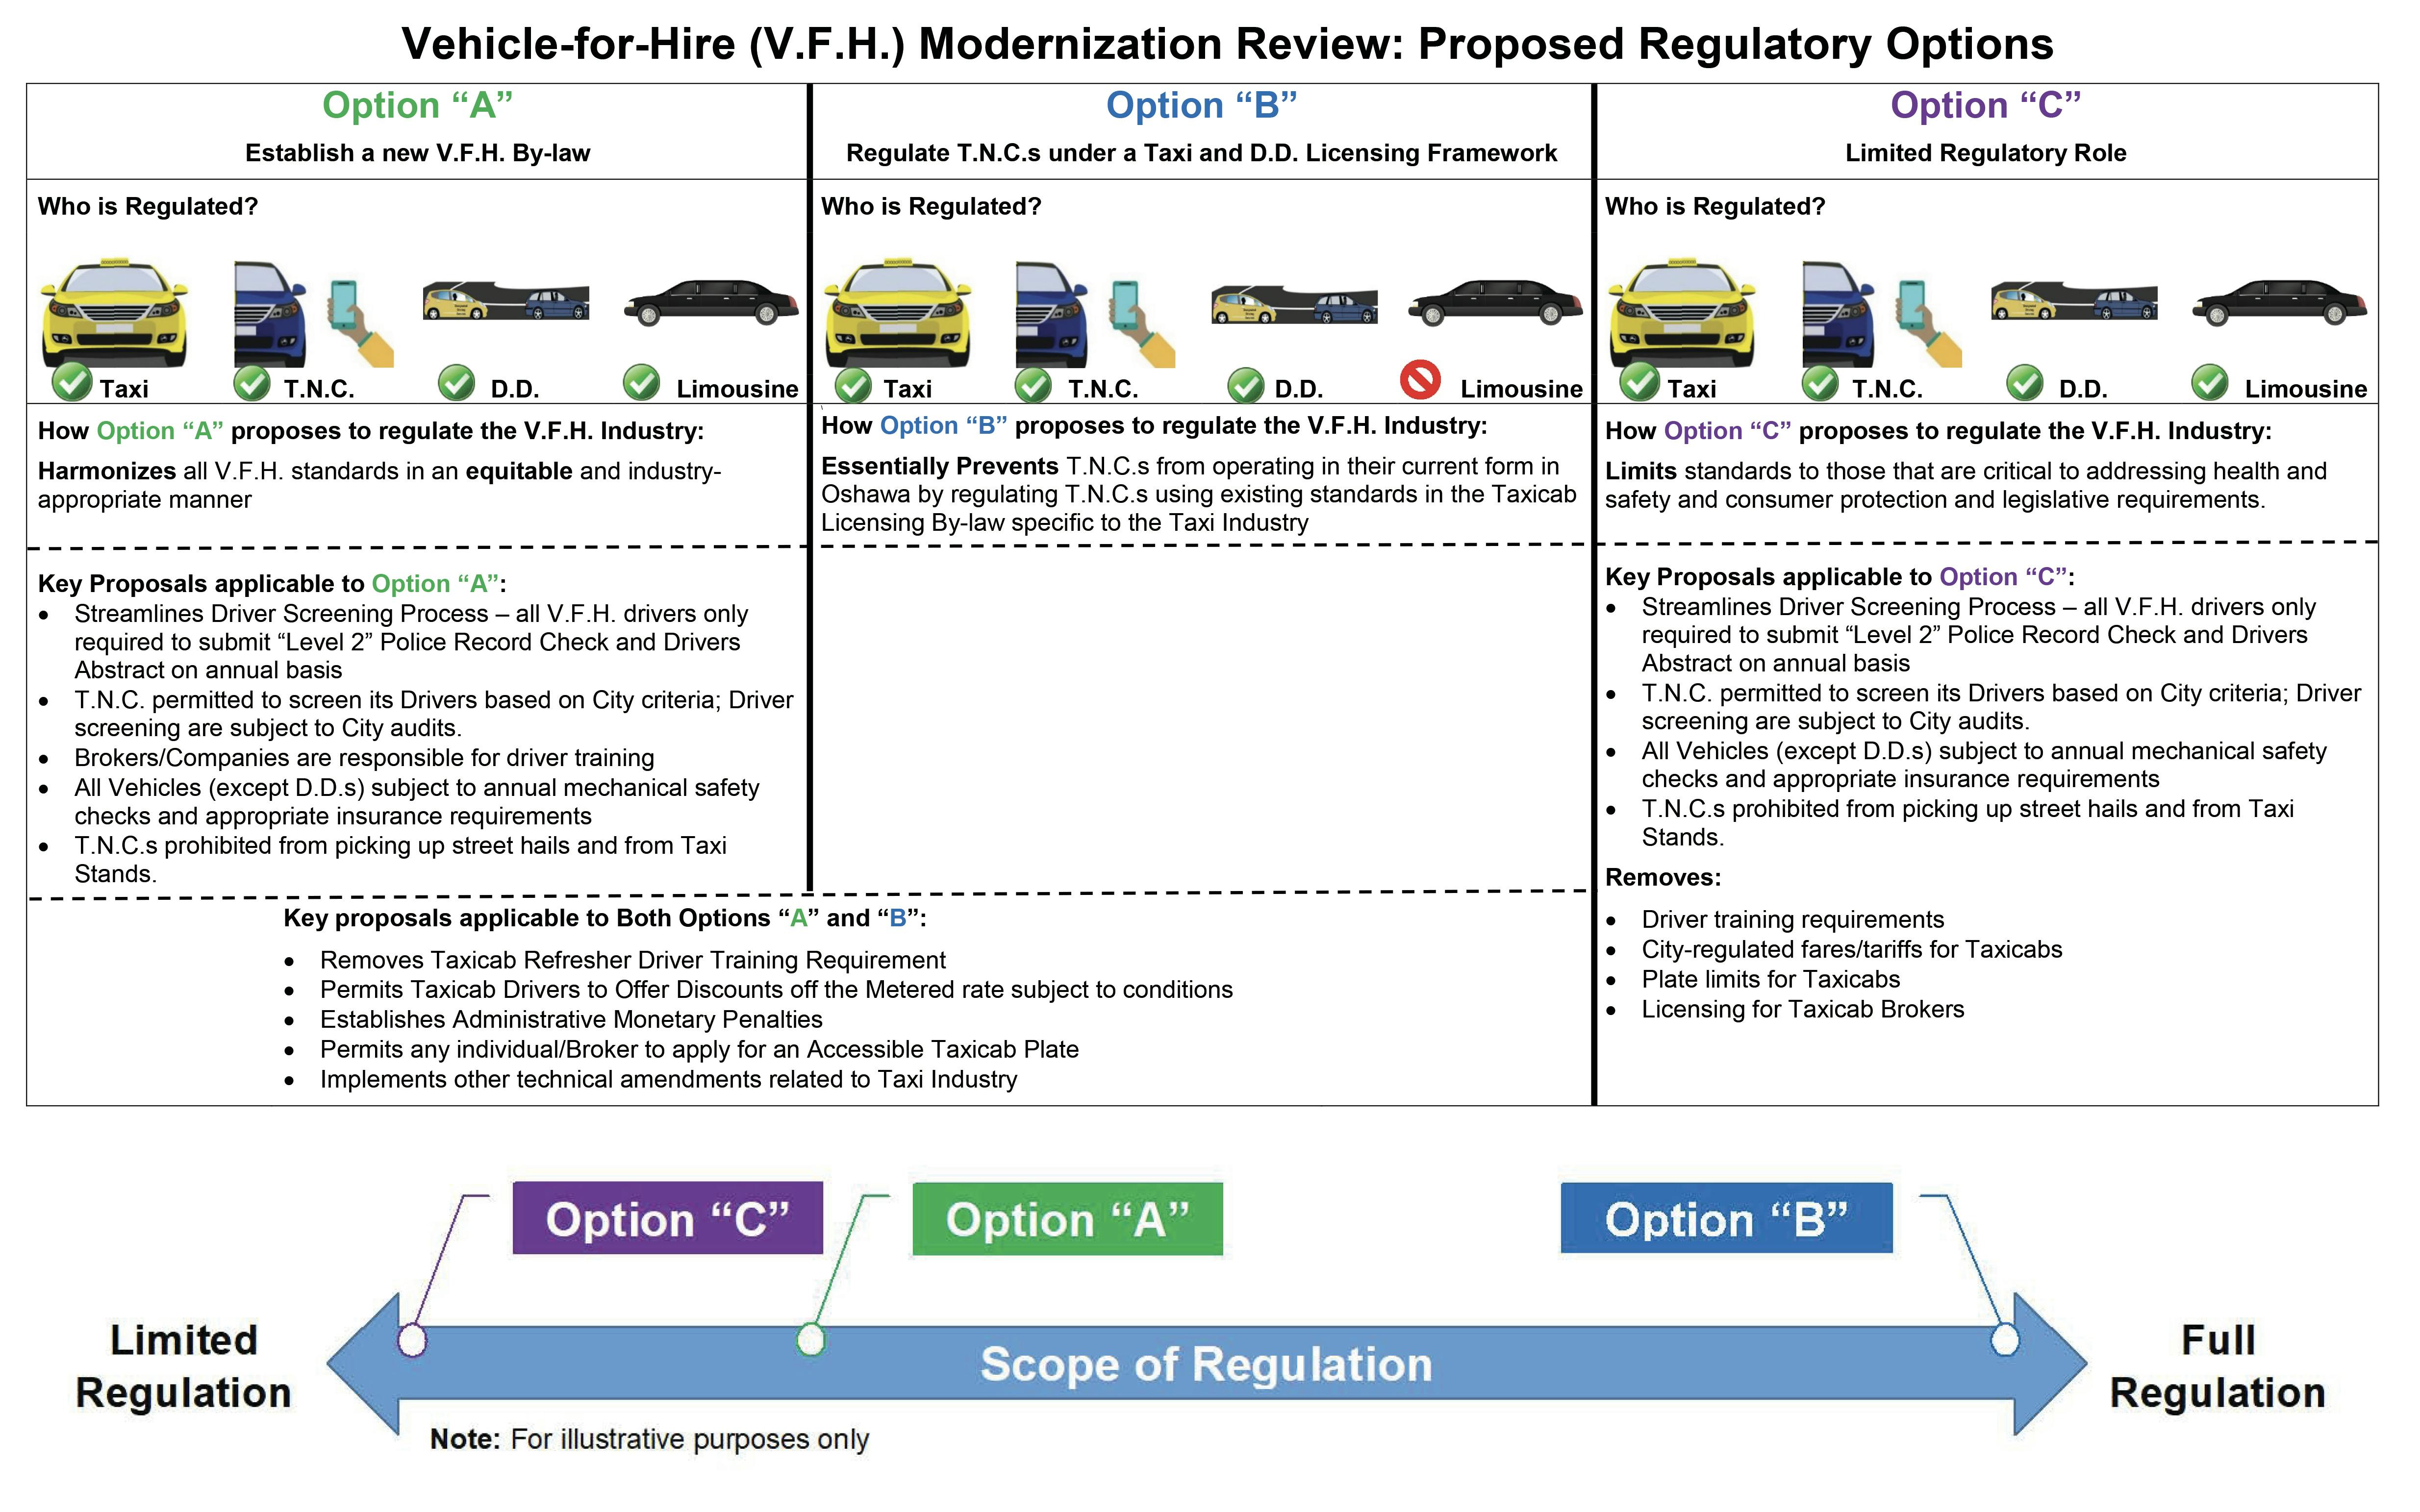 Vehicle-for-Hire Proposed Regulatory Options.jpg